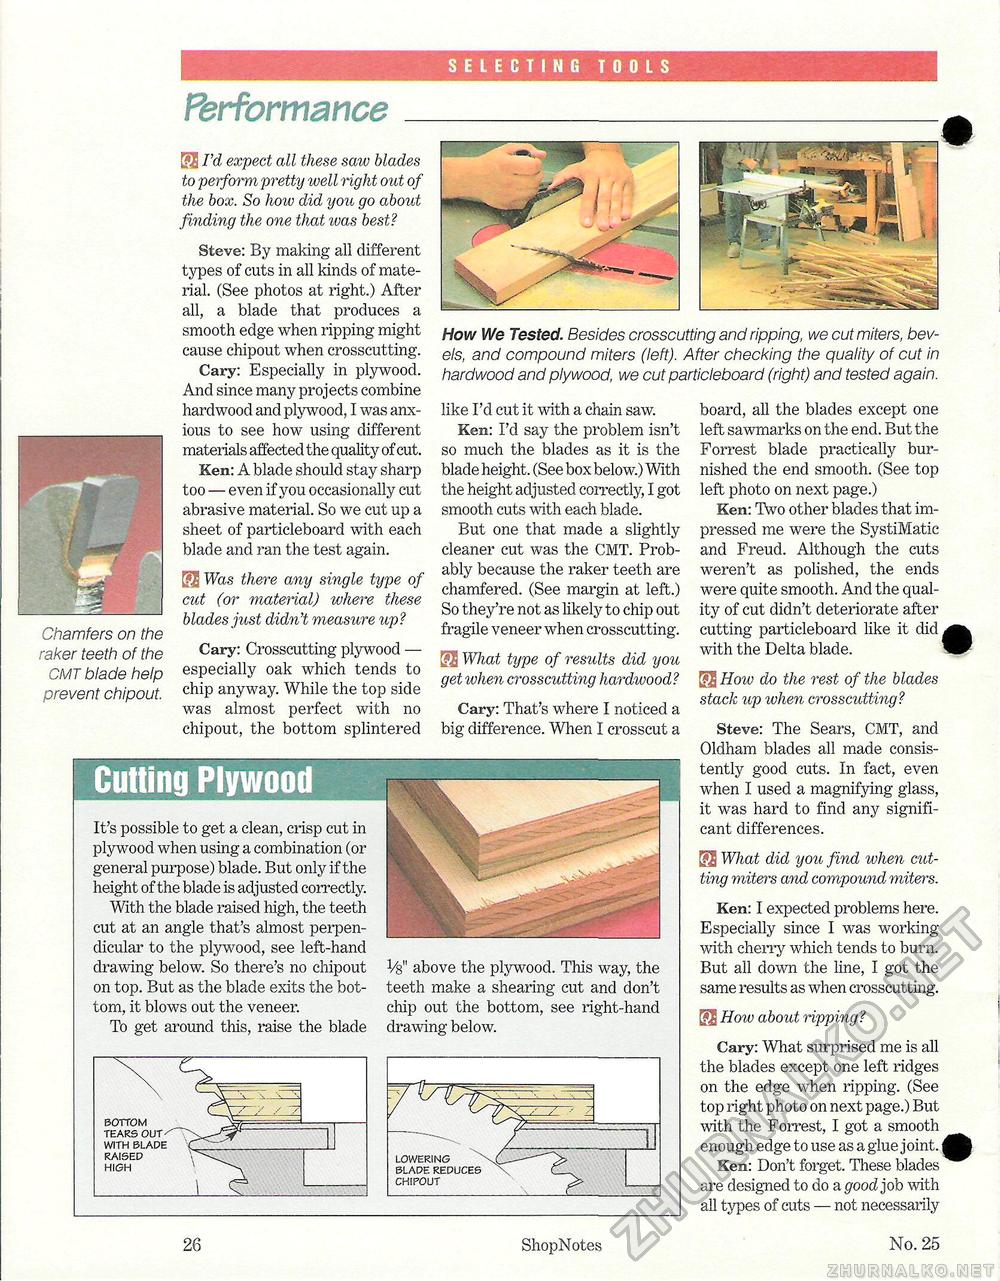 25 - Special Table Saw Issue,  26